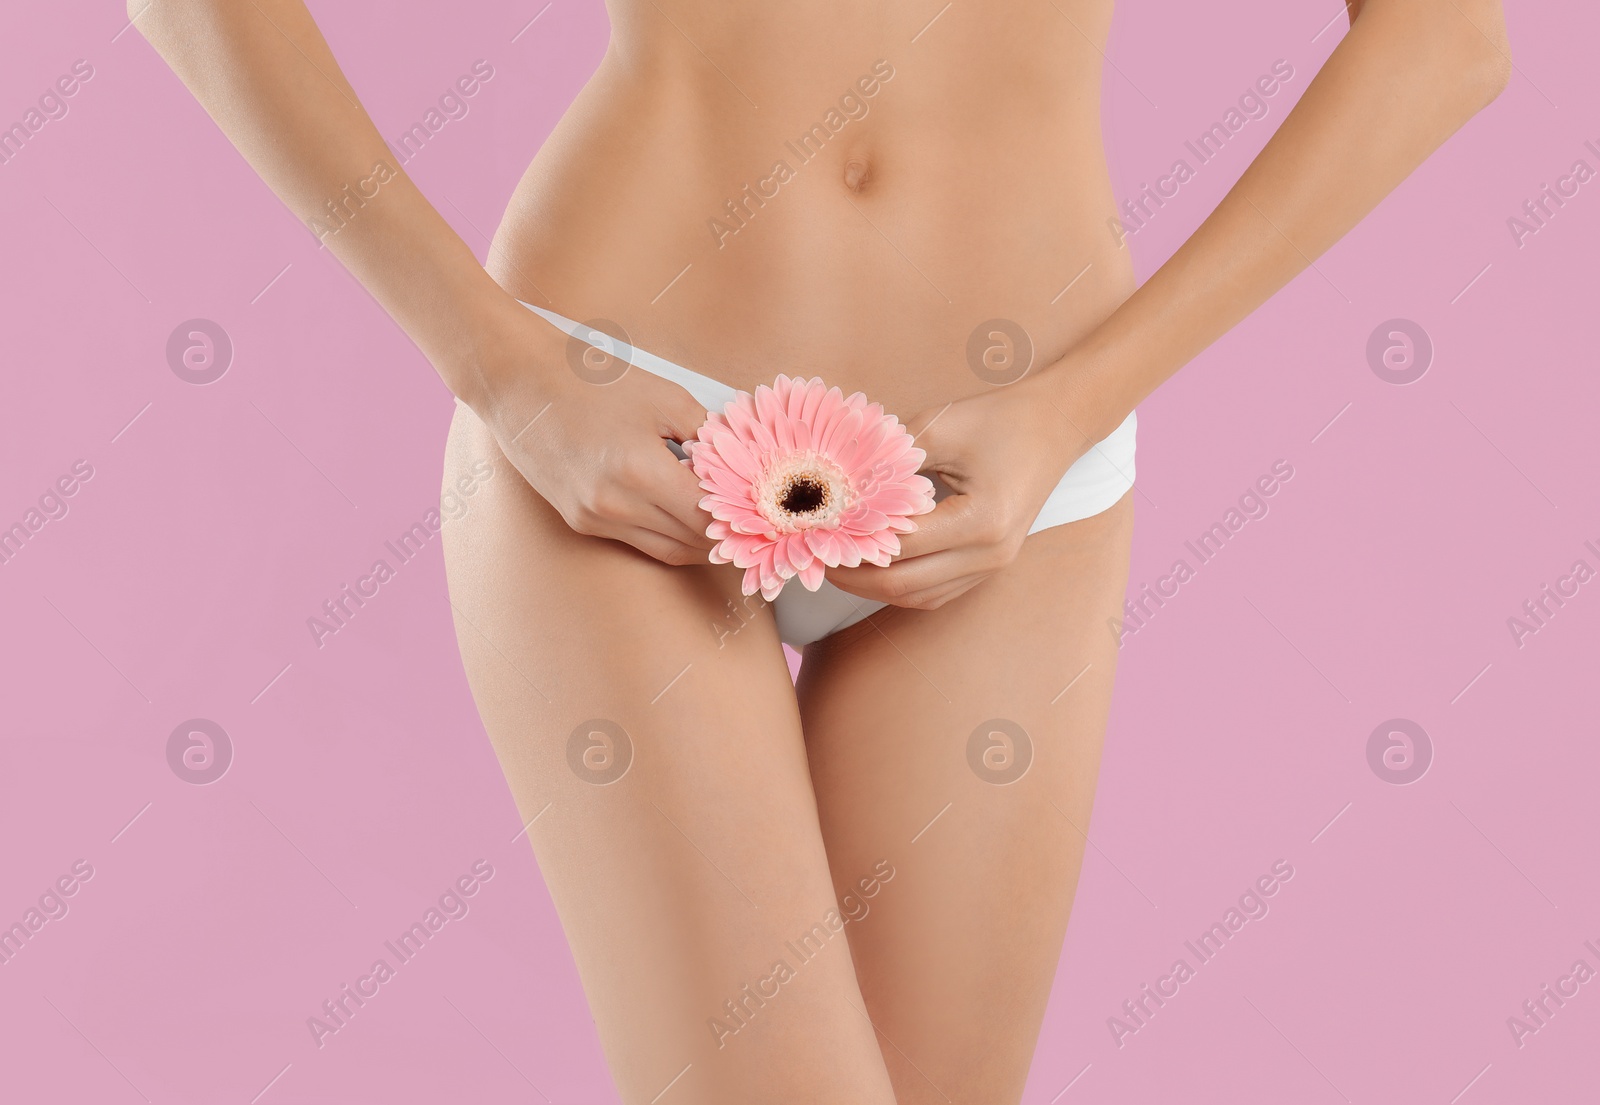 Photo of Woman with flower showing smooth skin after bikini epilation on pink background, closeup. Body care concept